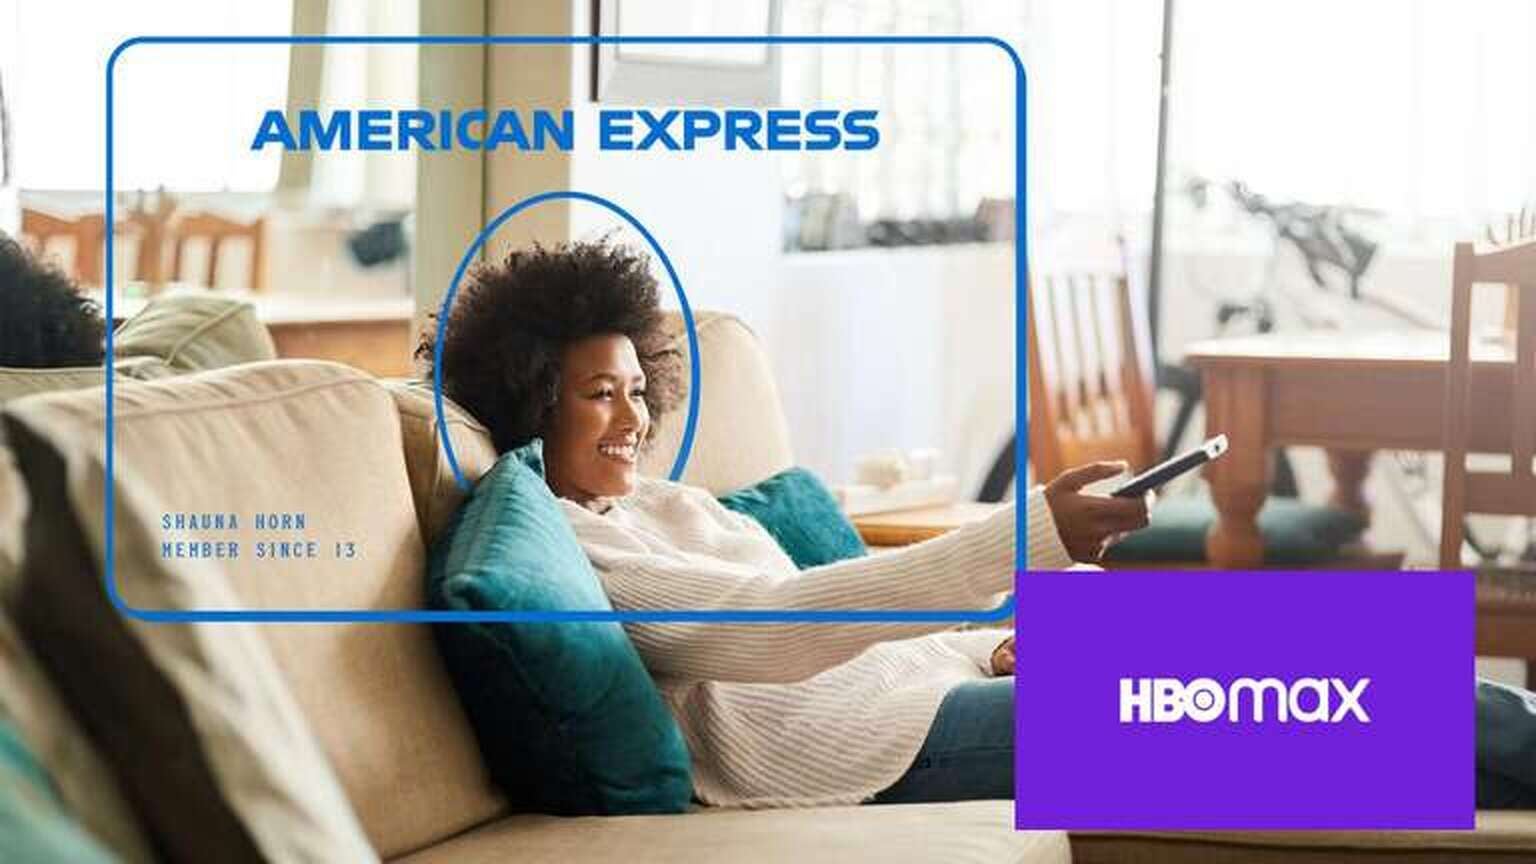 DEAL ALERT: Select Amex Cardholders Can Get Entire Year of HBO Max Ad-Free for Just $54.99 (65% Off)